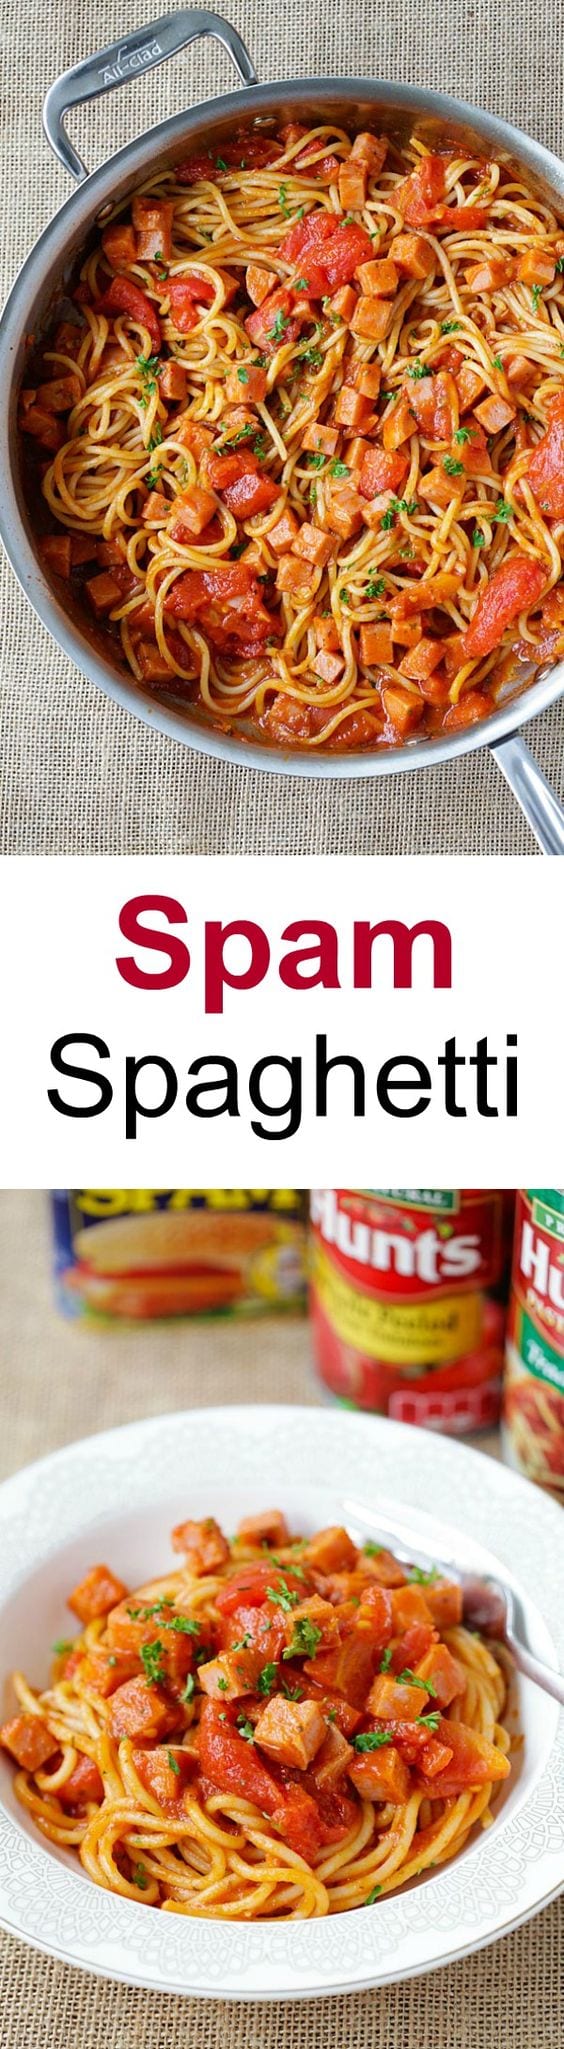 Spam Spaghetti – simple and quick pasta with spam and tomato sauce. Weeknight dinner is a quick and takes only 15 minutes from prep to dinner table | rasamalaysia.com